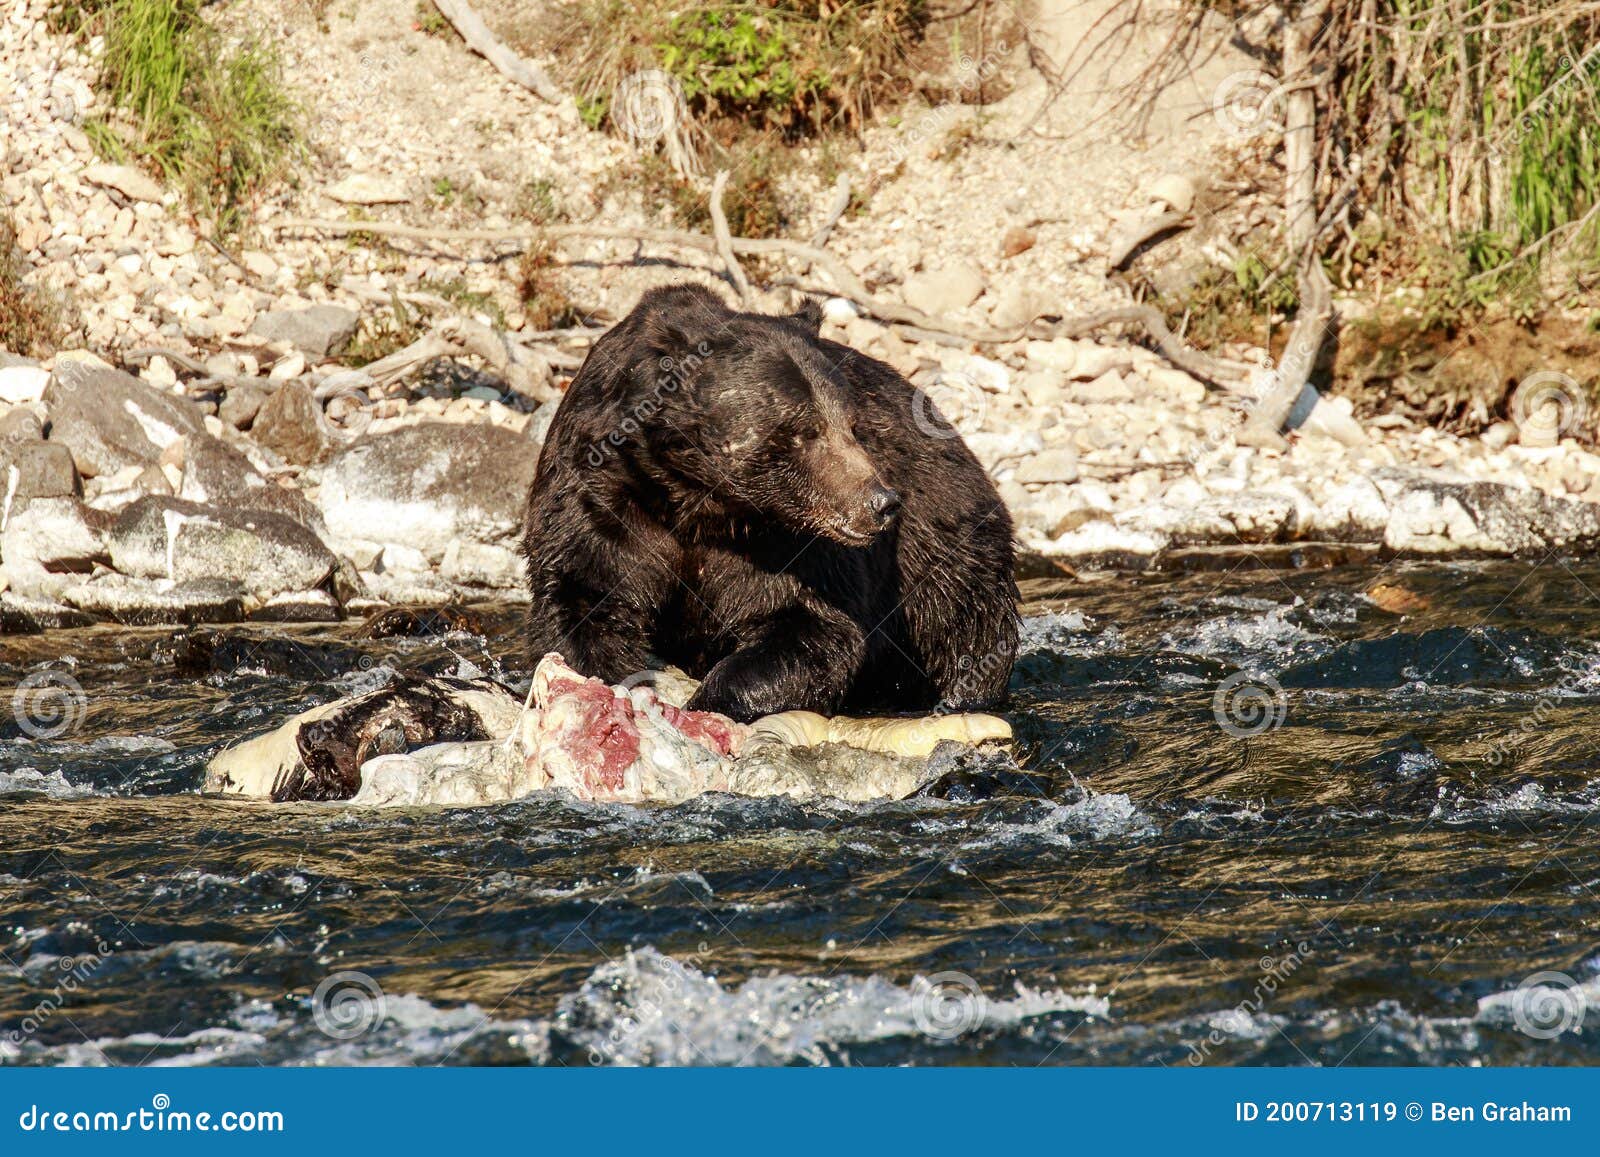 hø Ærlighed mekanisme Grizzly Bear Yellowstone River Stock Image - Image of wildlife, buffalo:  200713119